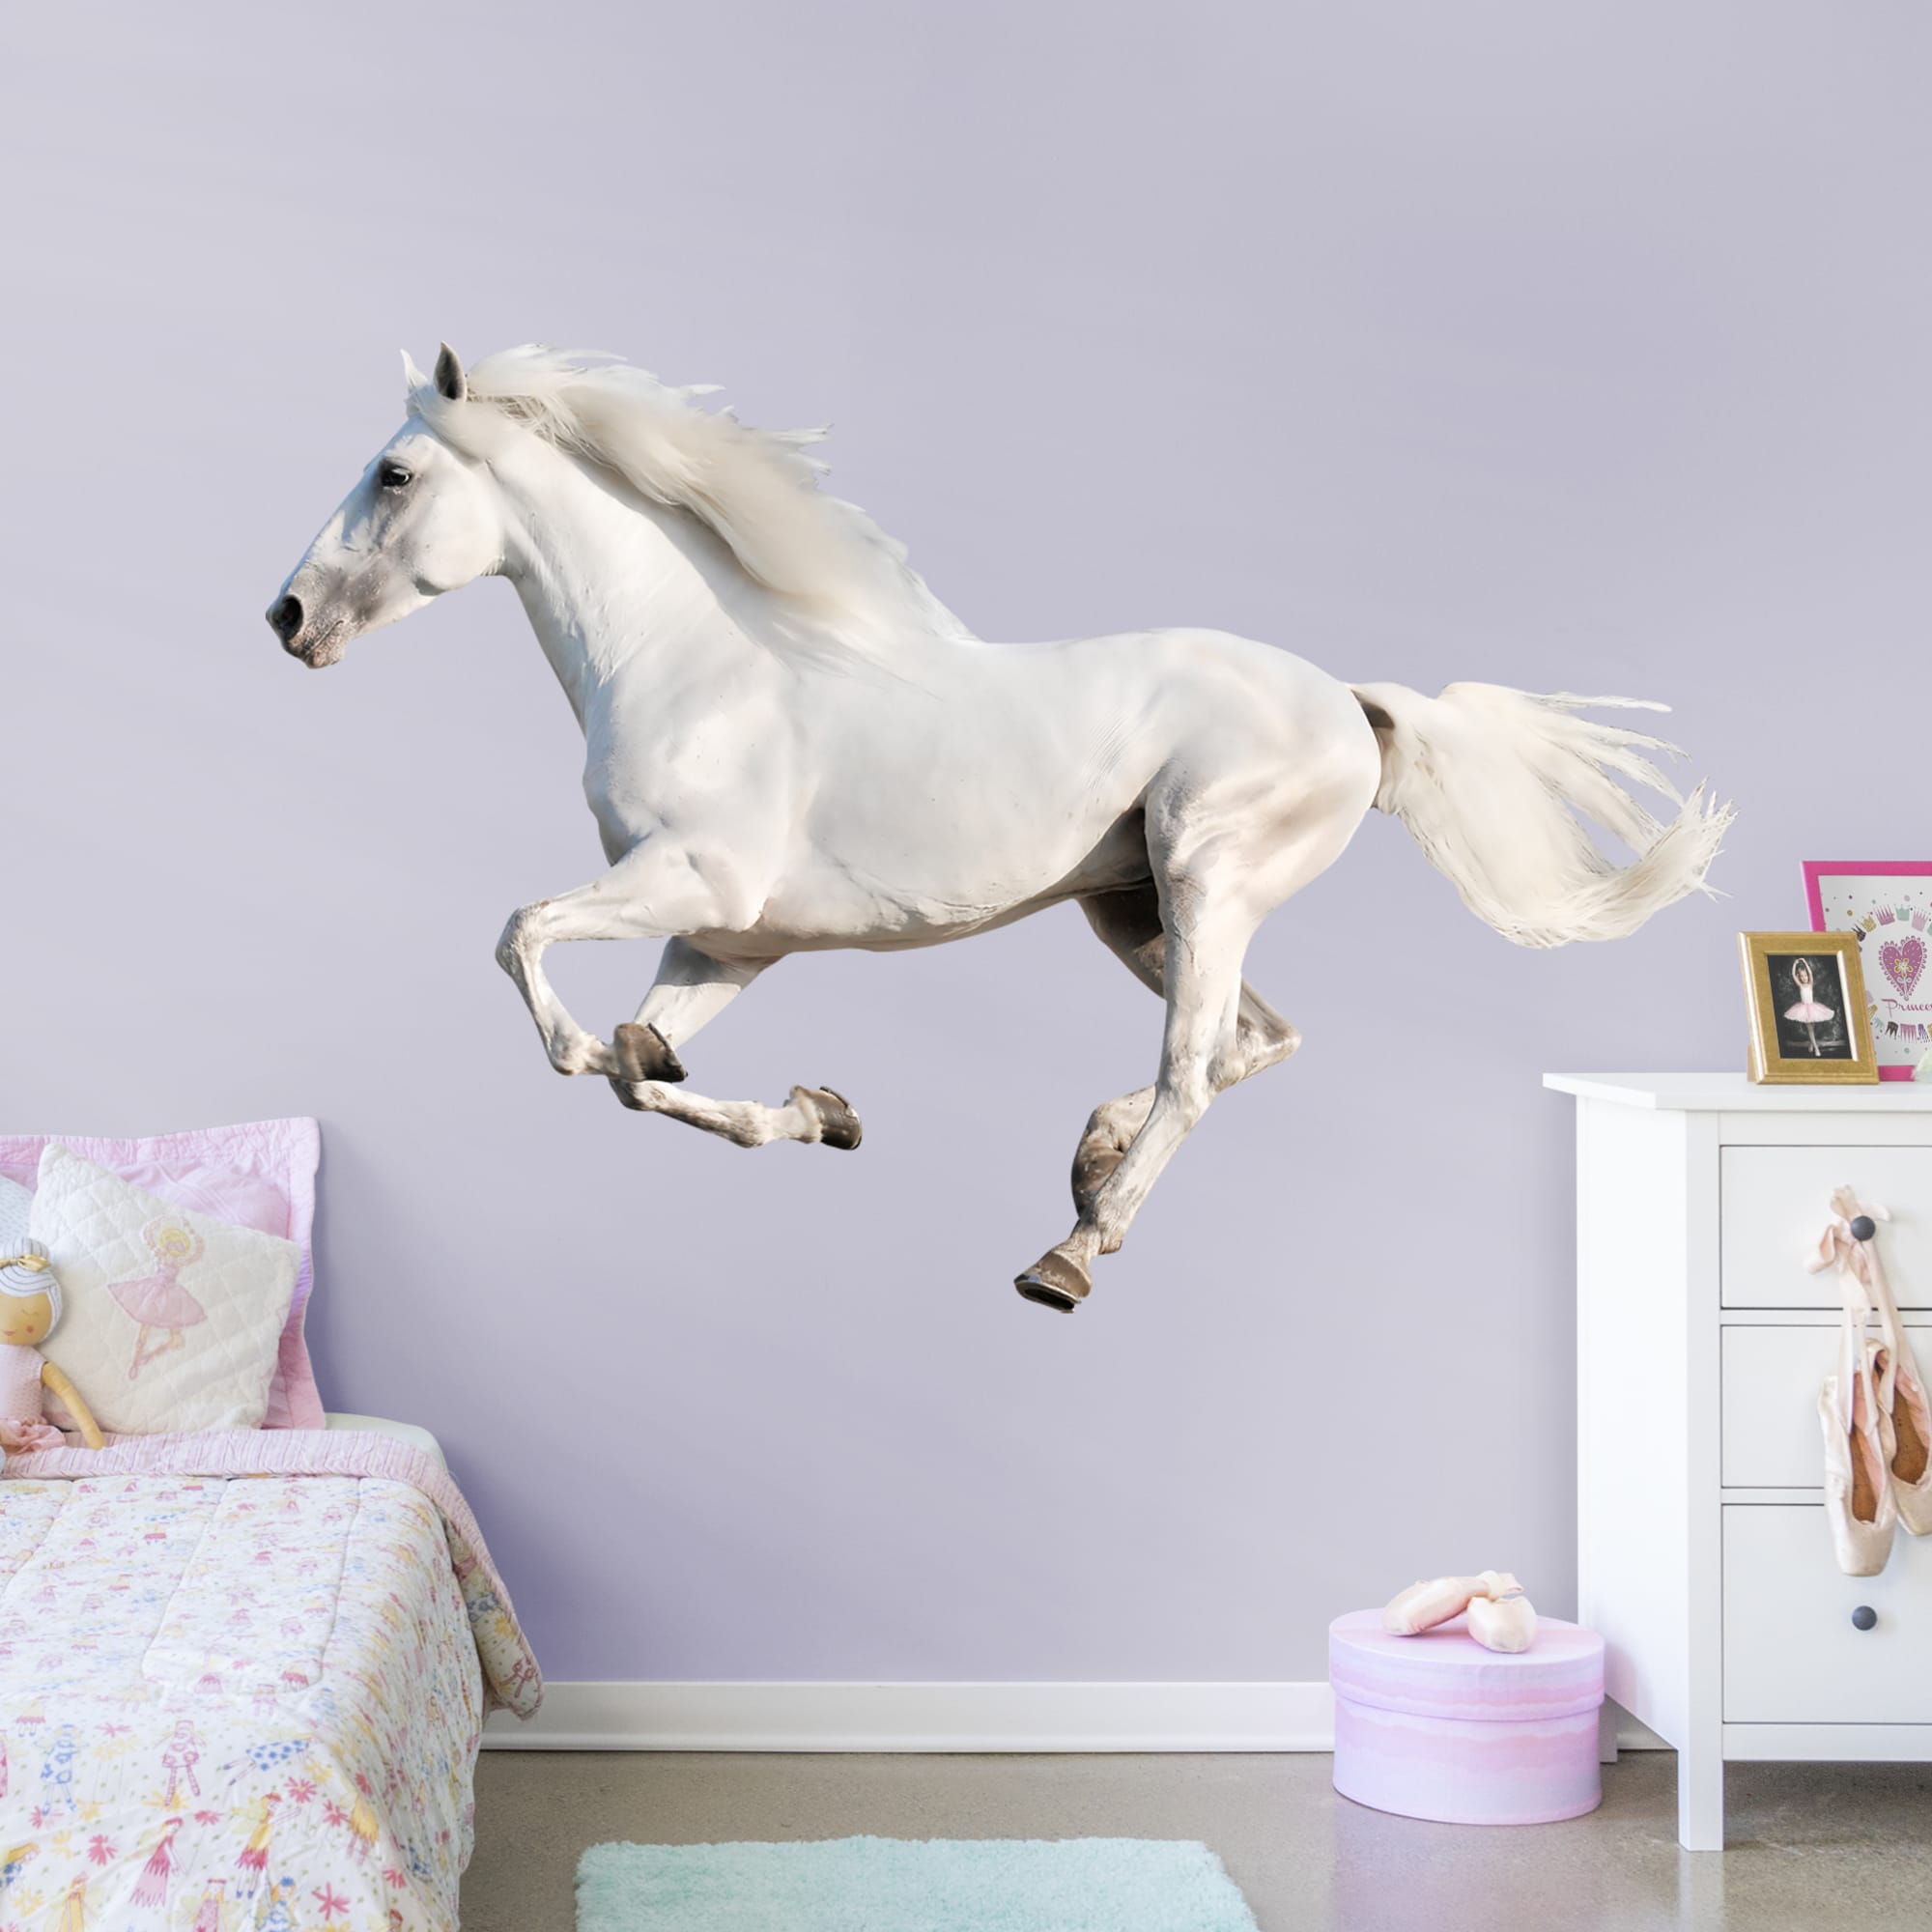 White Horse Running - Removable Vinyl Decal Huge Animal + 2 Decals (82"W x 57"H) by Fathead